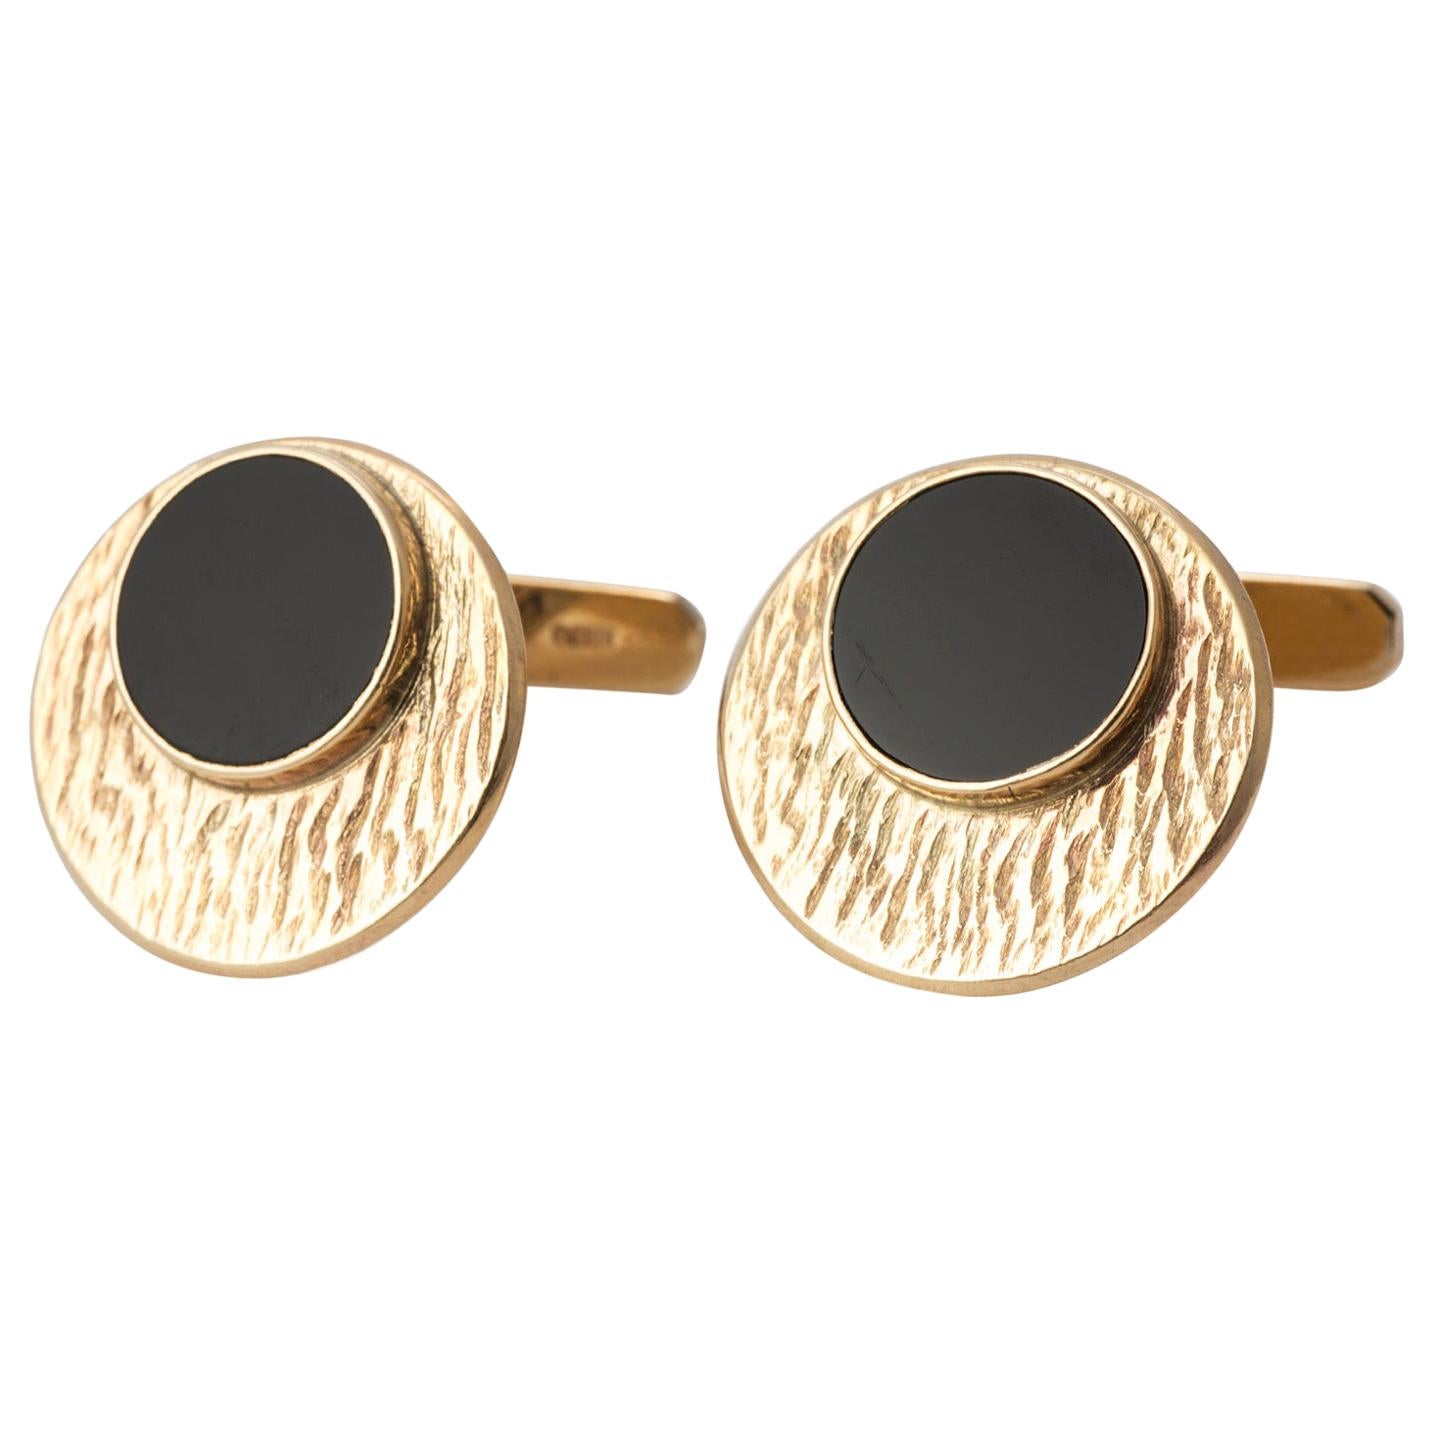 Modernist Onyx and Textured Swilink 9 Carat Gold Cuff Links For Sale